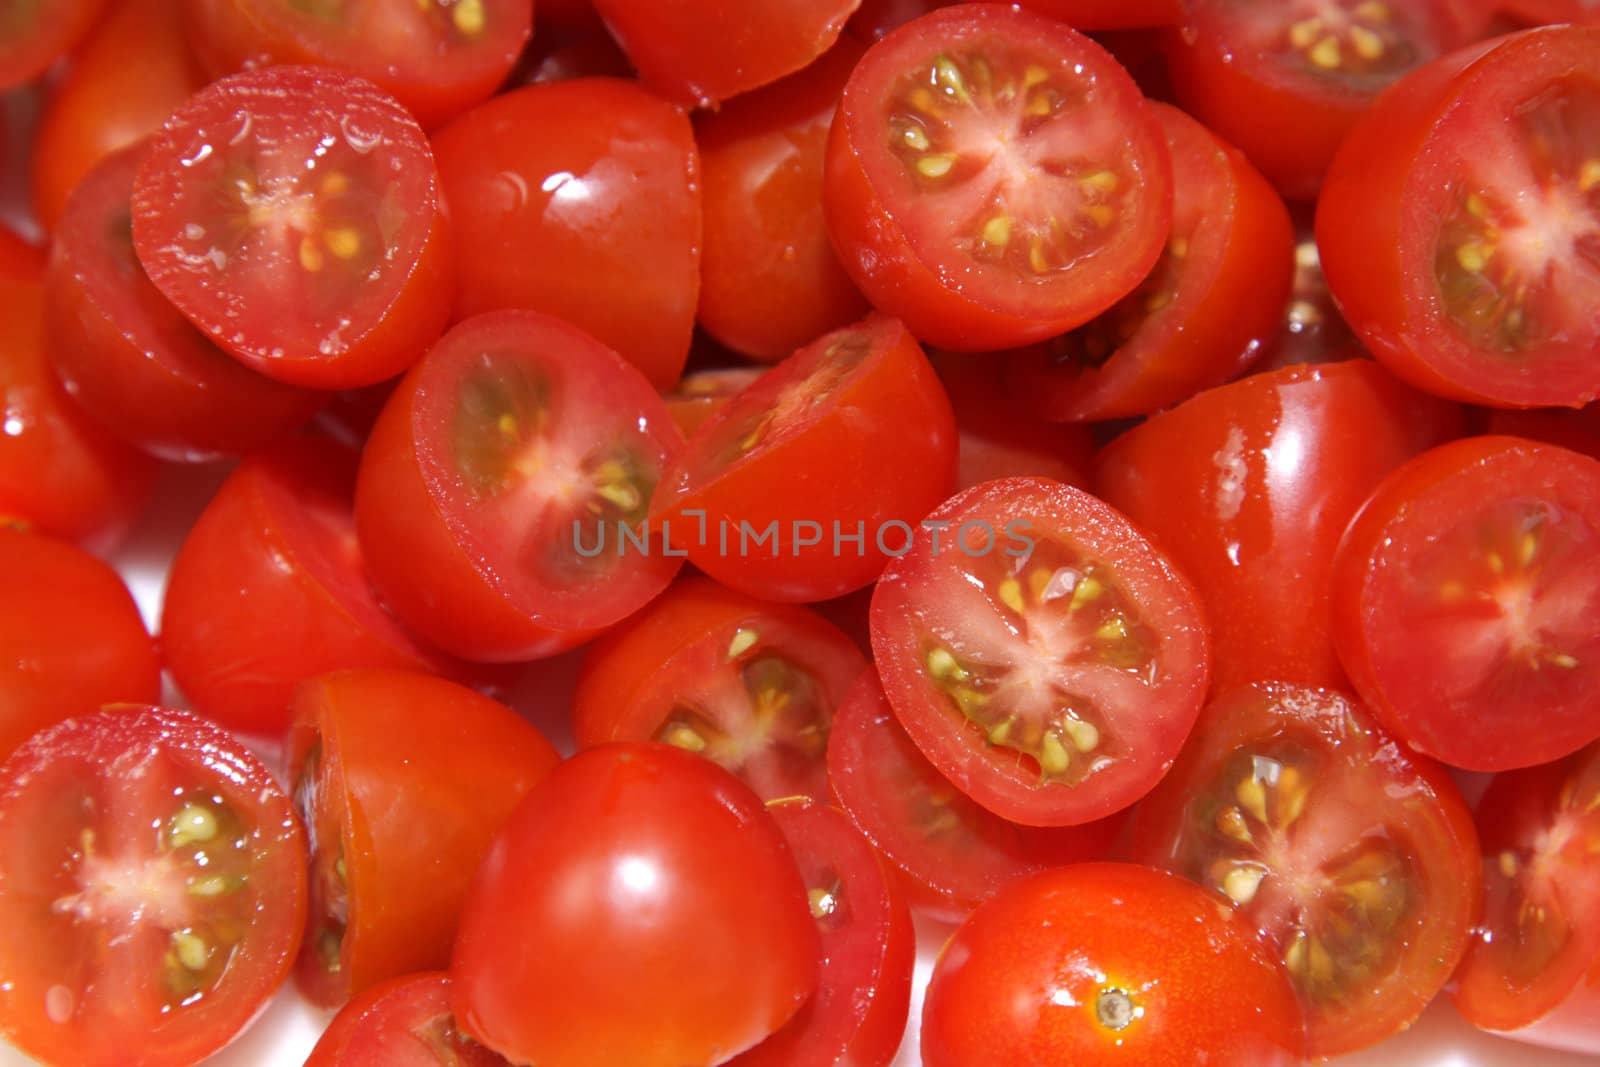 A pile of chopped of red cherry tomatoes.
